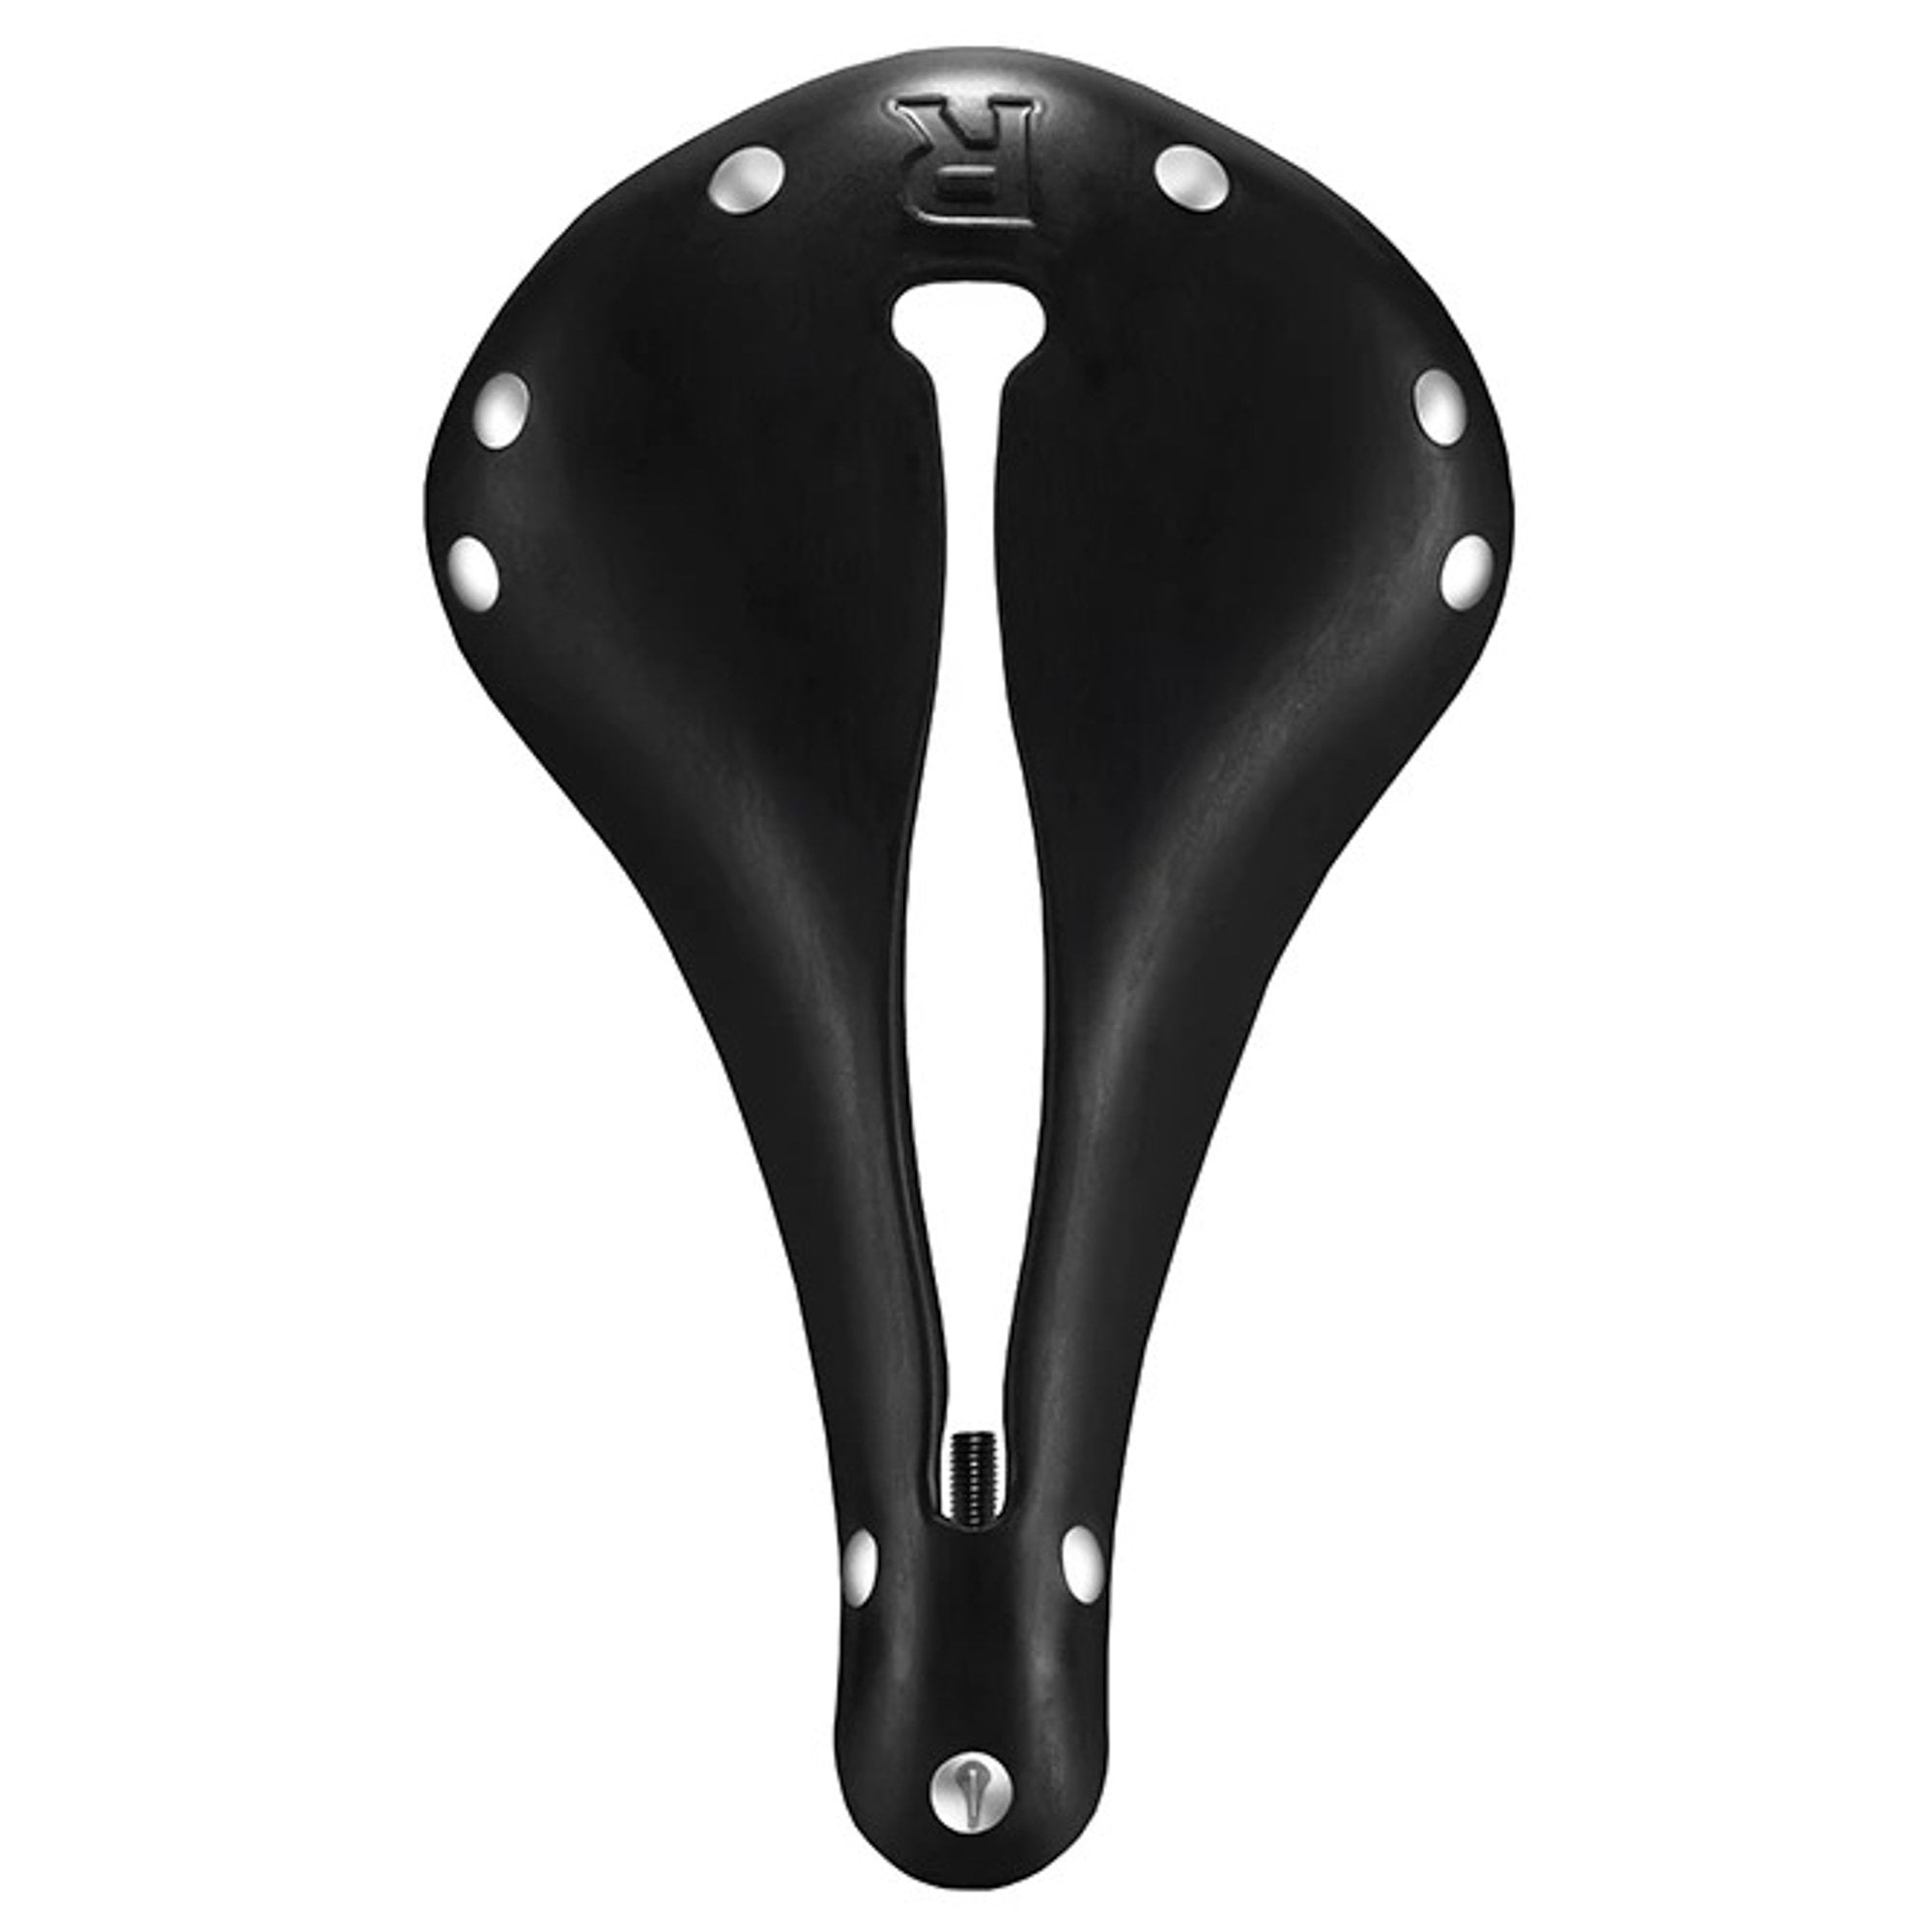 SELLE ANATOMICA R2 Rubber Saddle – SimWorks Online Store